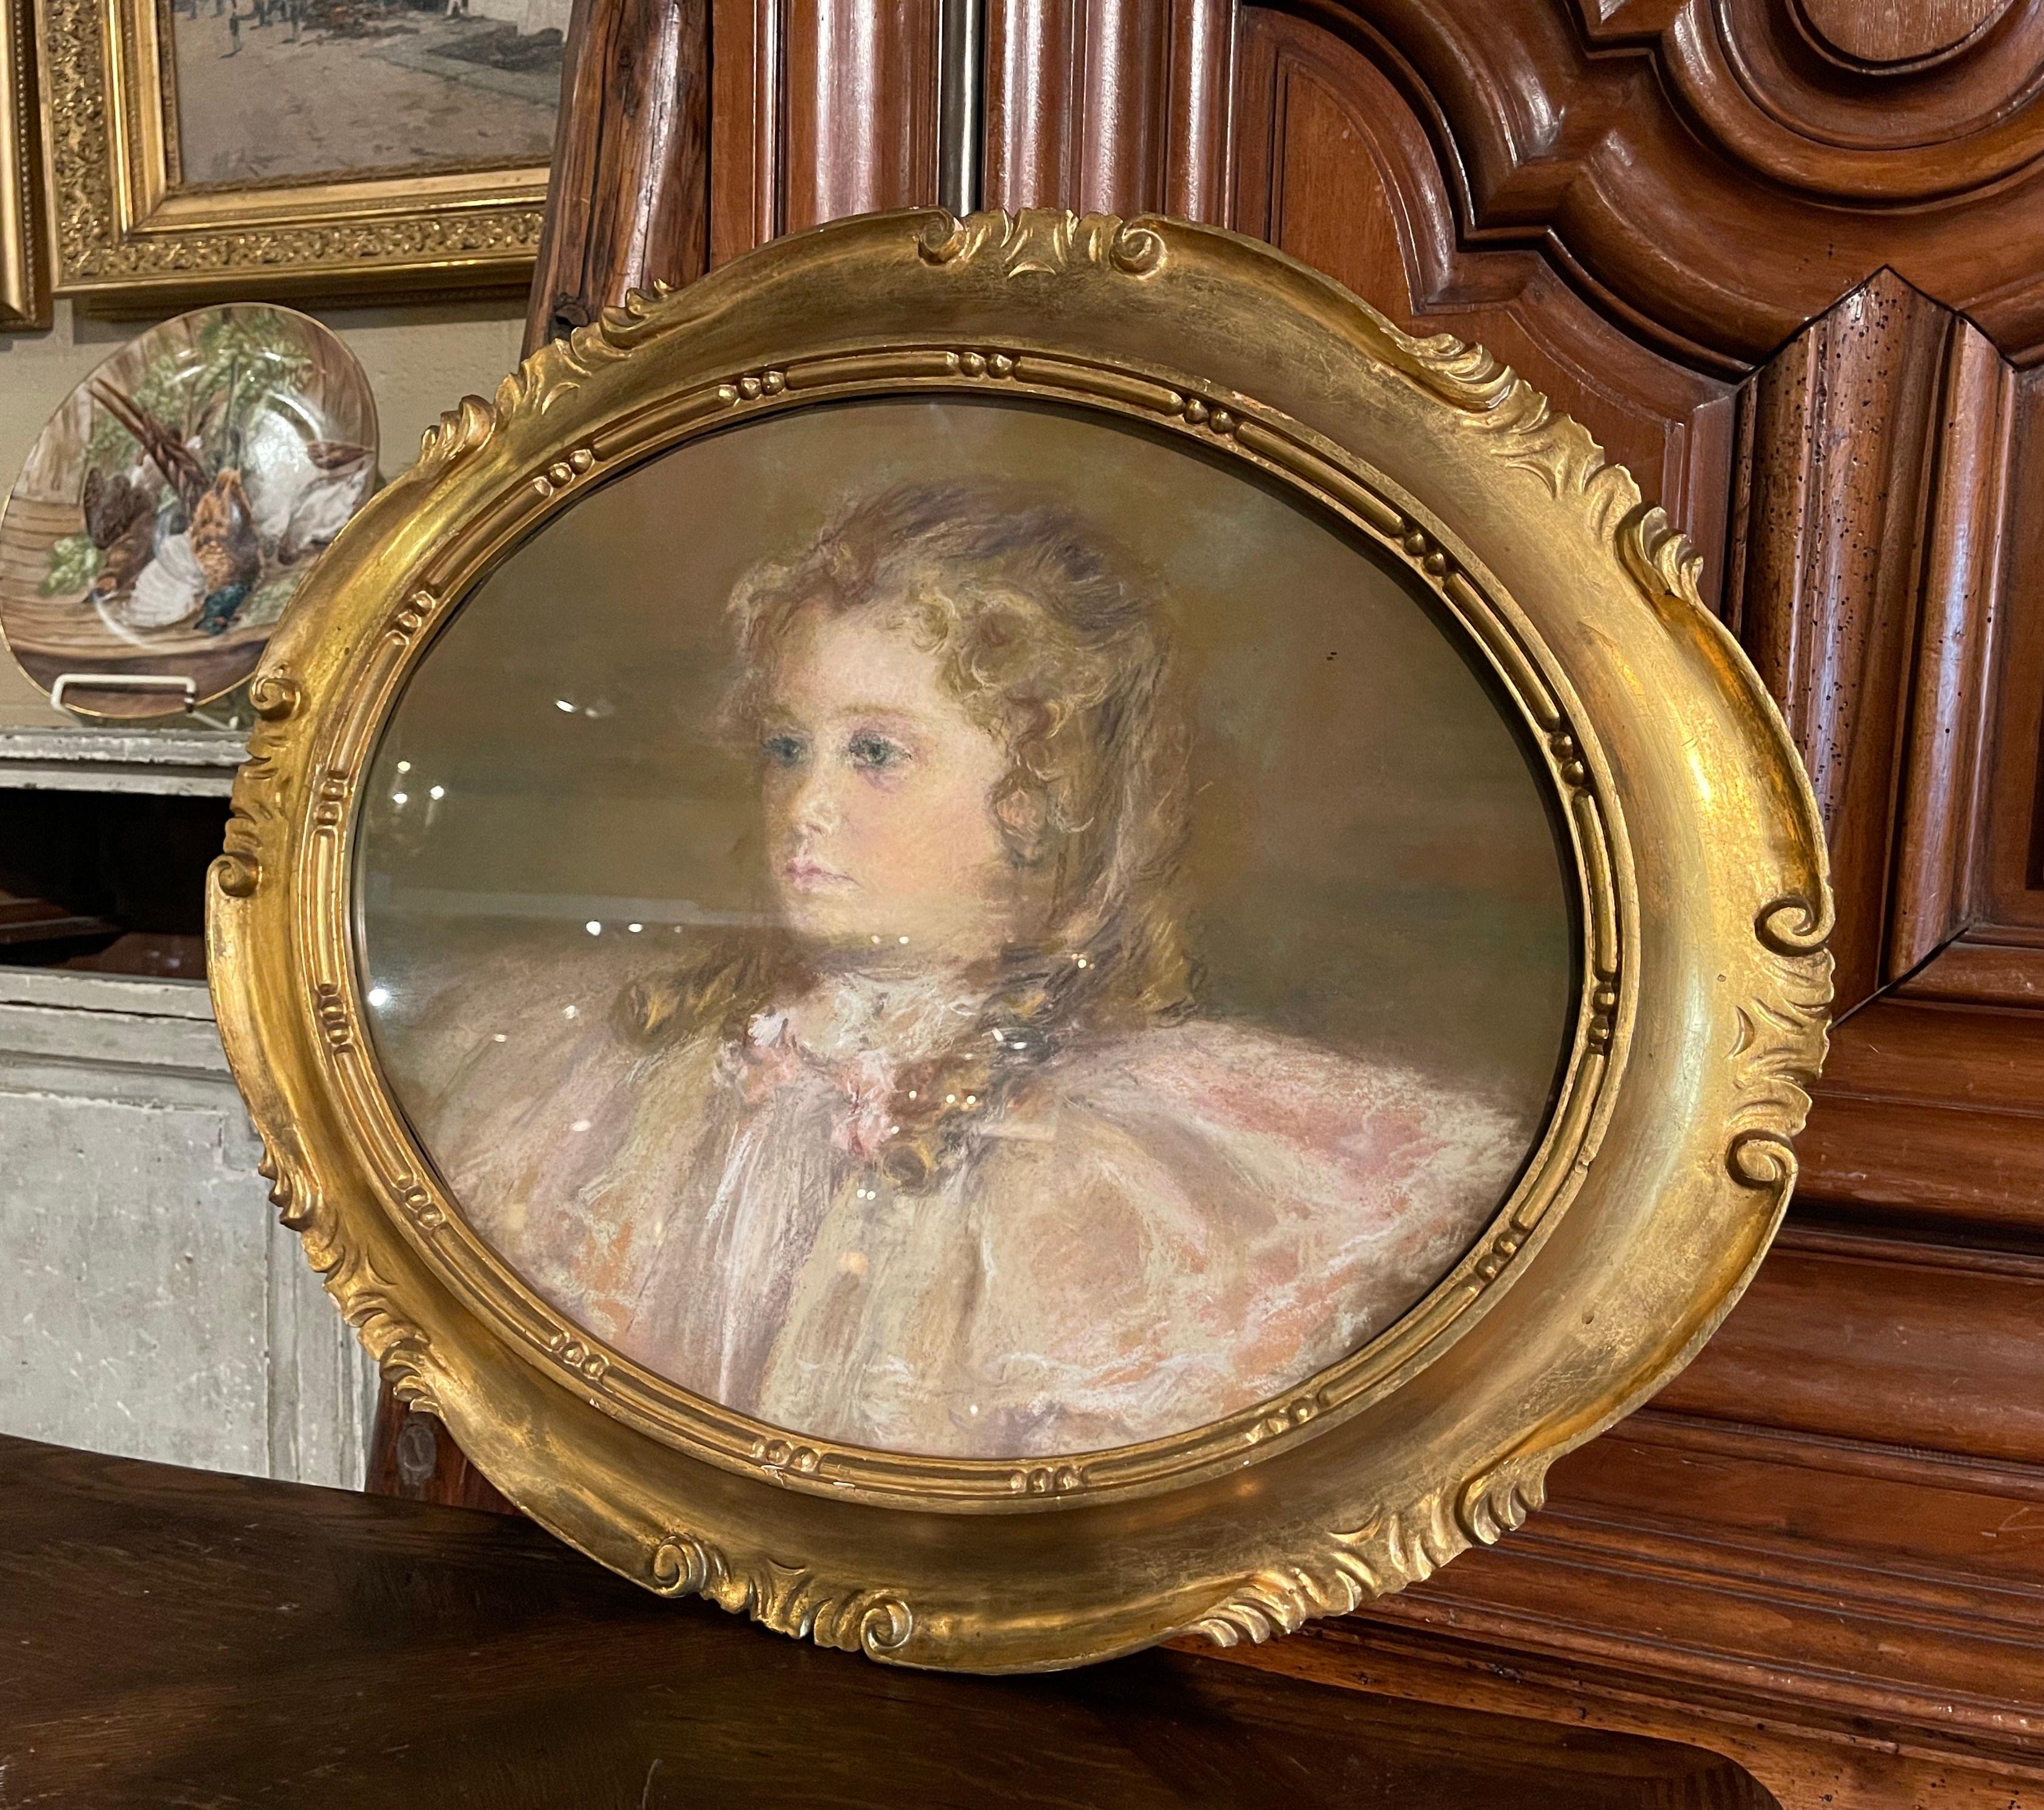 Decorate a study, bedroom, or living space with this beautiful antique pastel masterpiece. Created in France circa 1880, the artwork depicts a young blonde girl seemingly gazing off into the distance, dressed in a 19th-century fluffy white dress